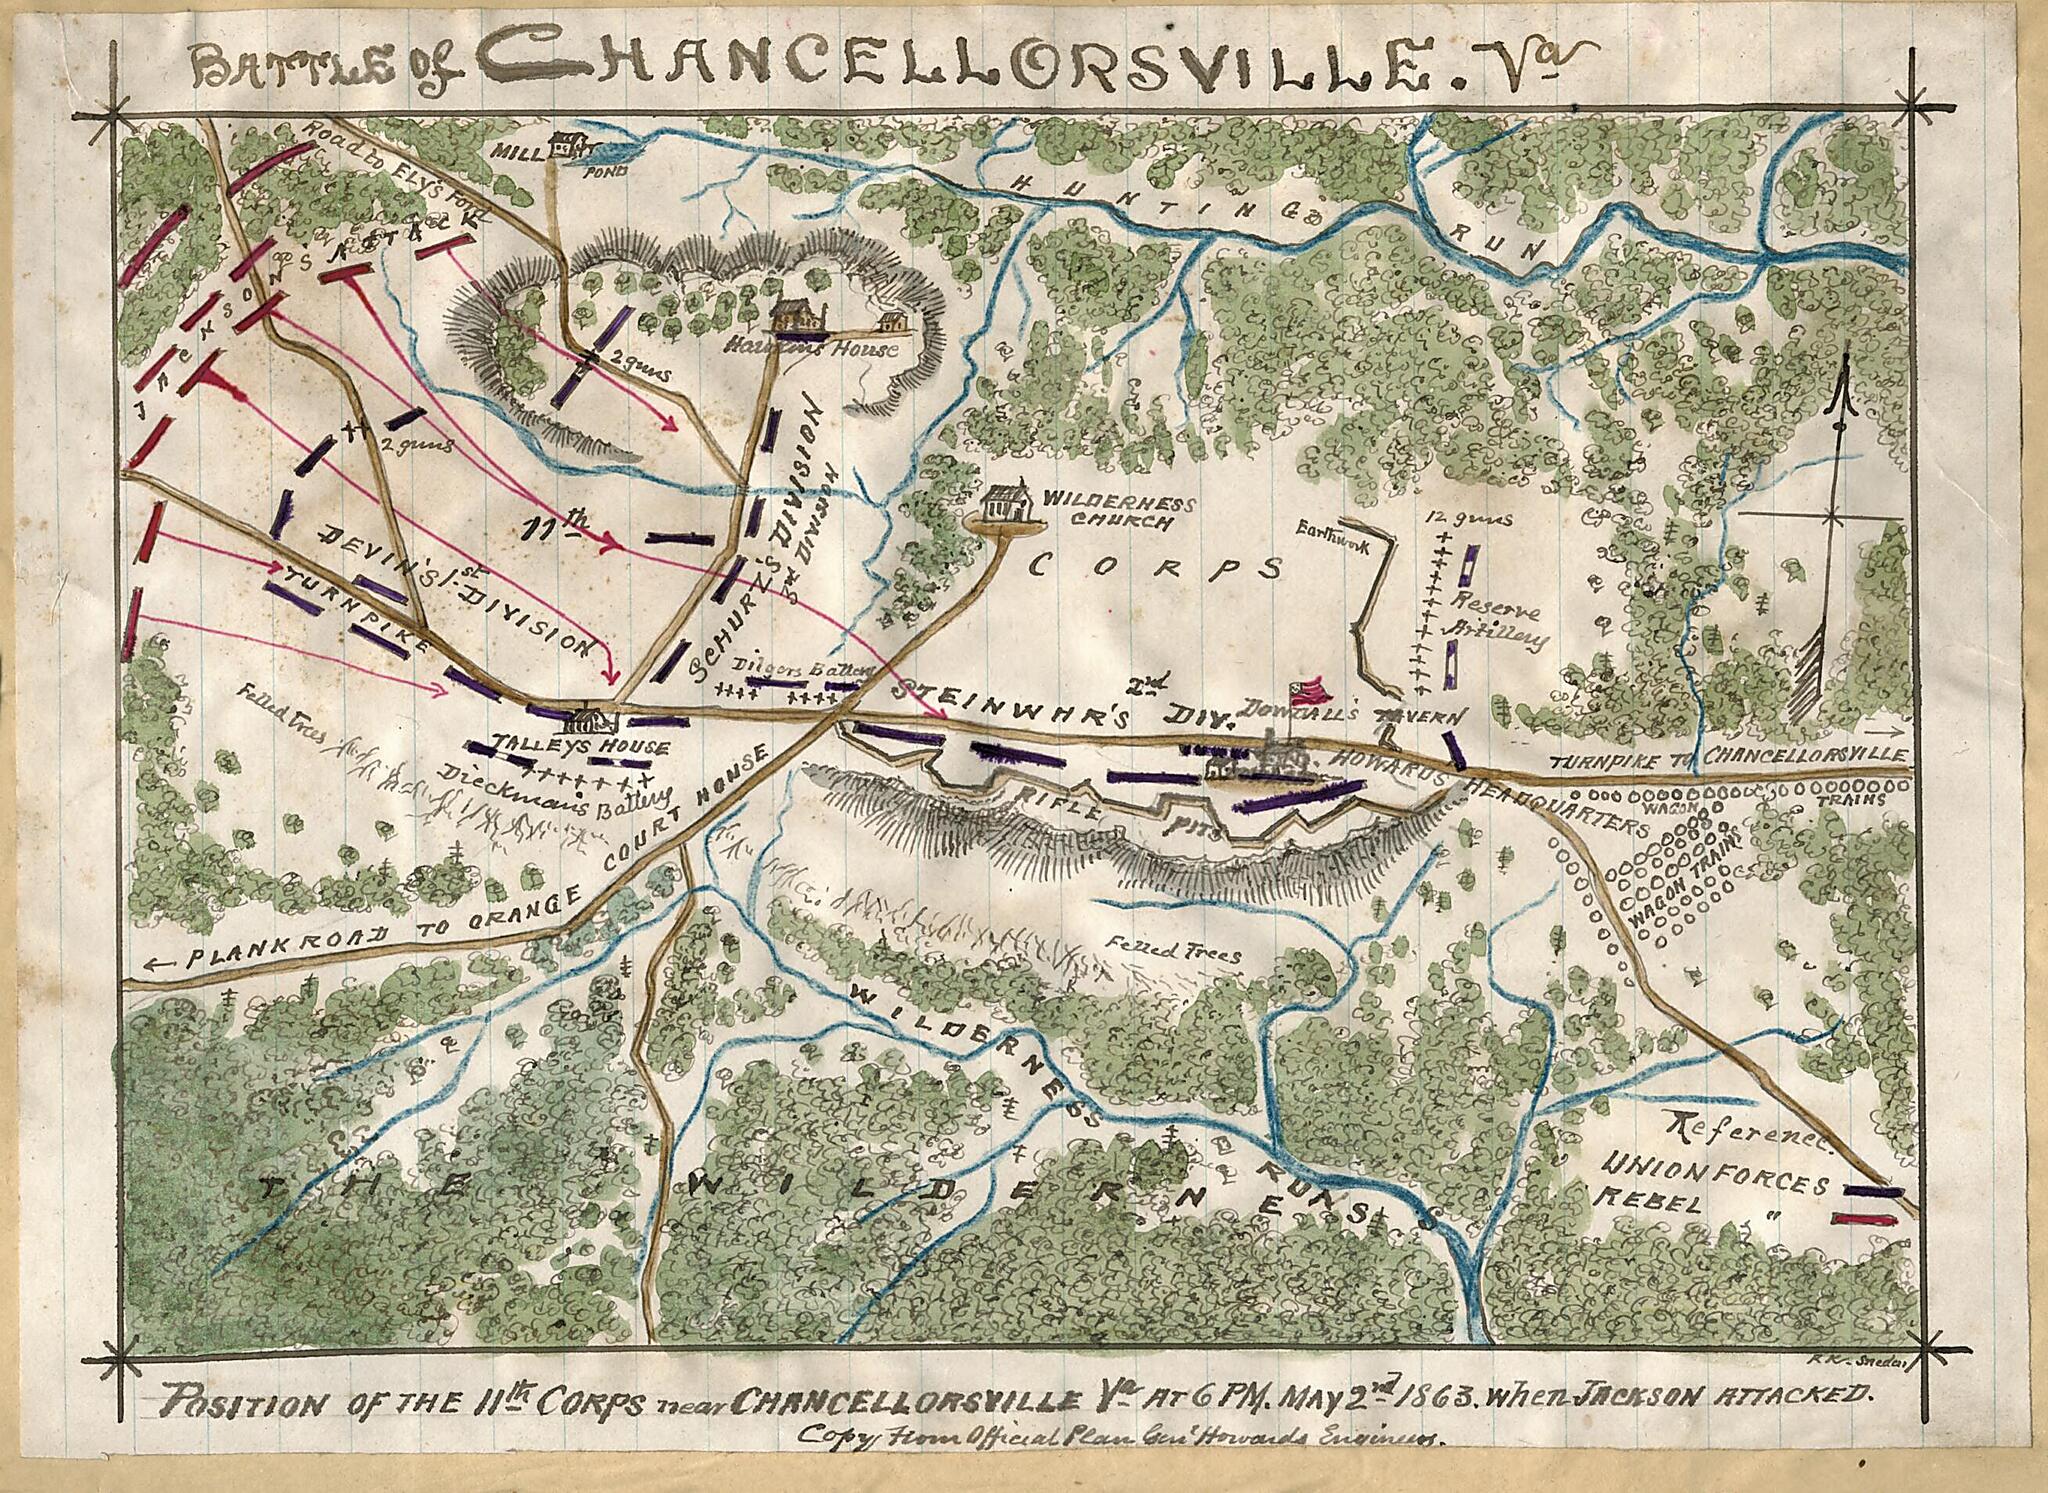 This old map of Battle of Chancellorsville, Va. : from 1863 was created by Robert Knox Sneden in 1863